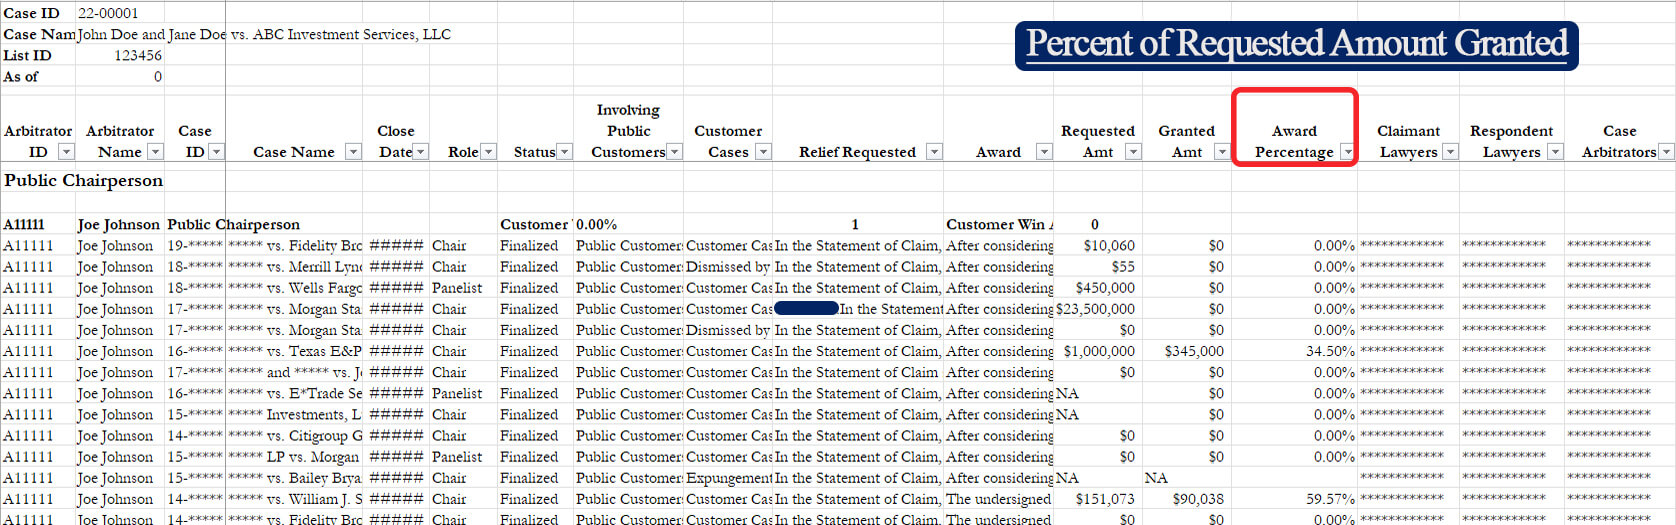 A screenshot highlighting the award percentage column on the cases page of our arbitrator ranking excel file.